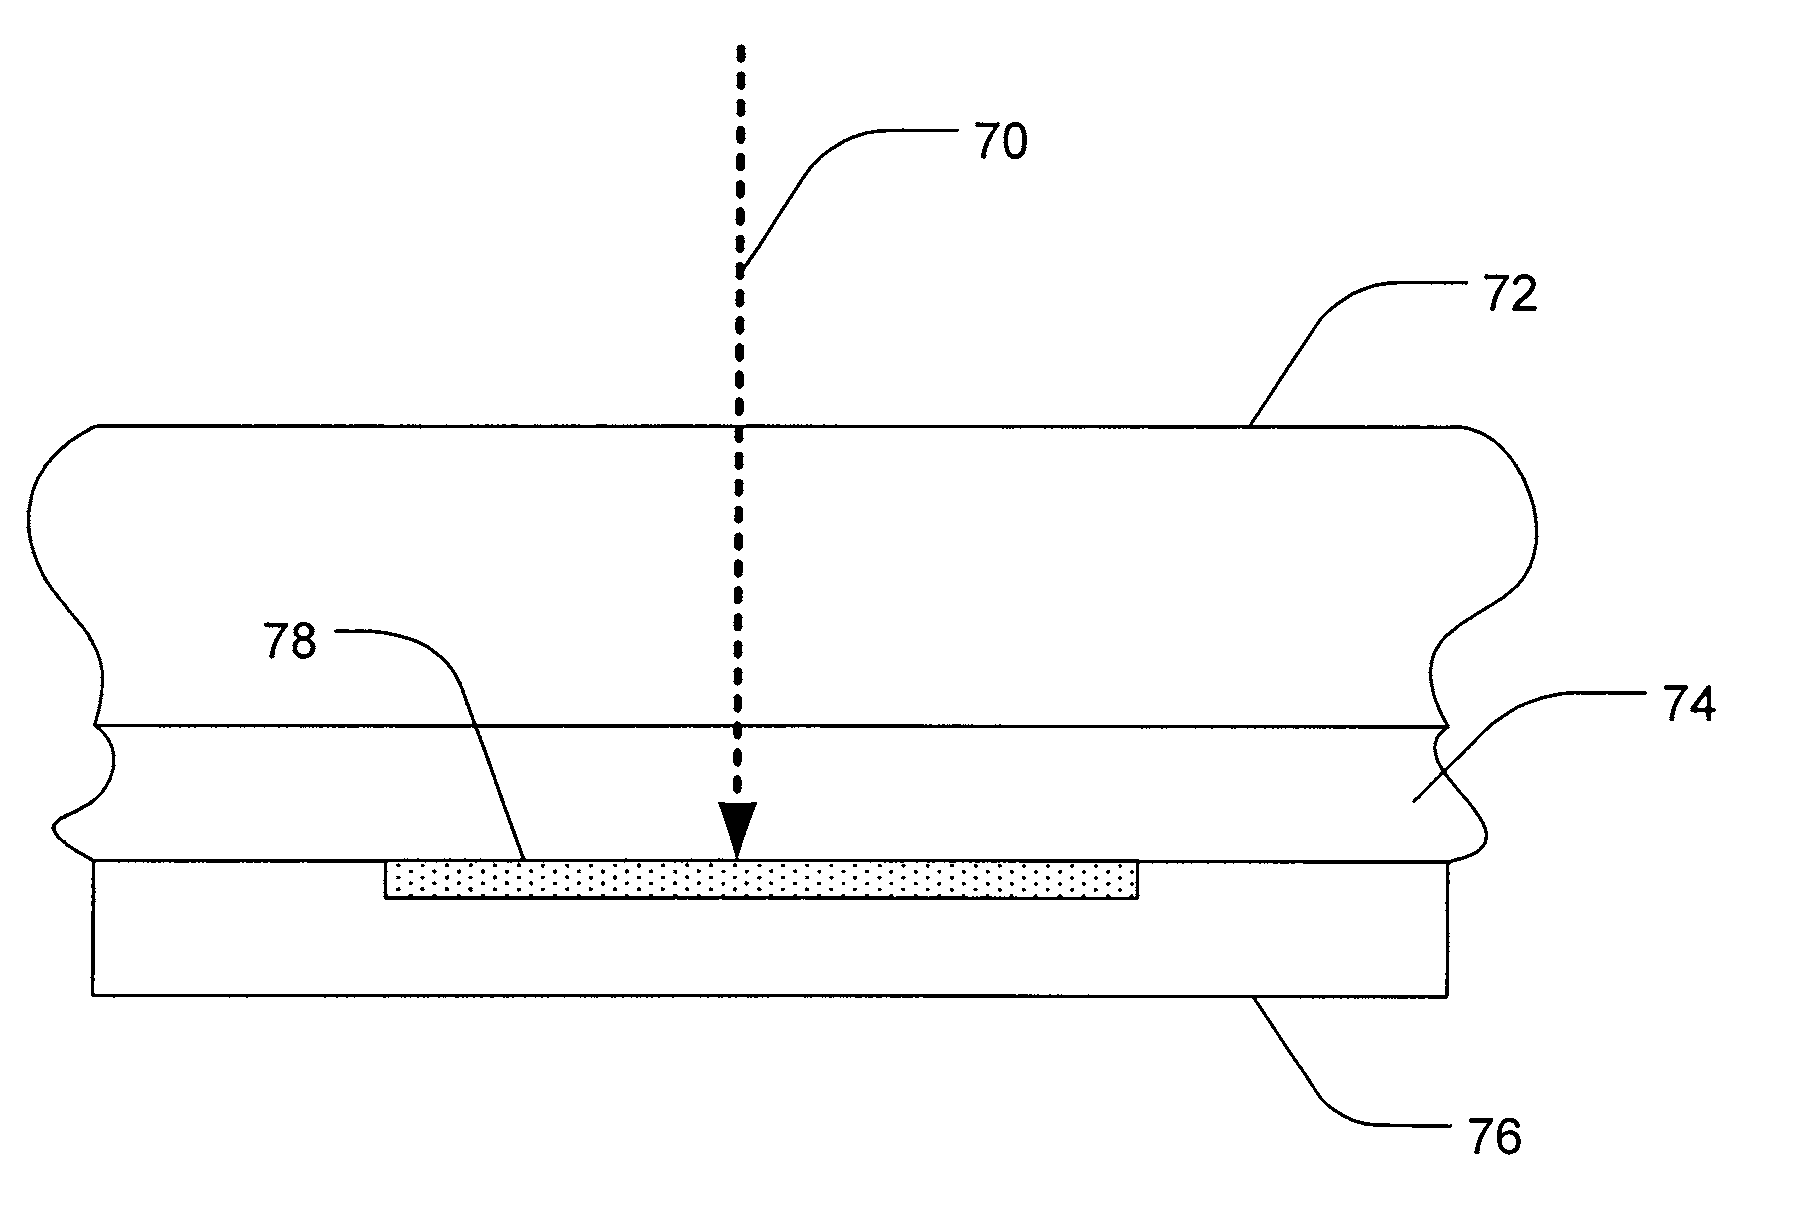 Semiconductor surface modification